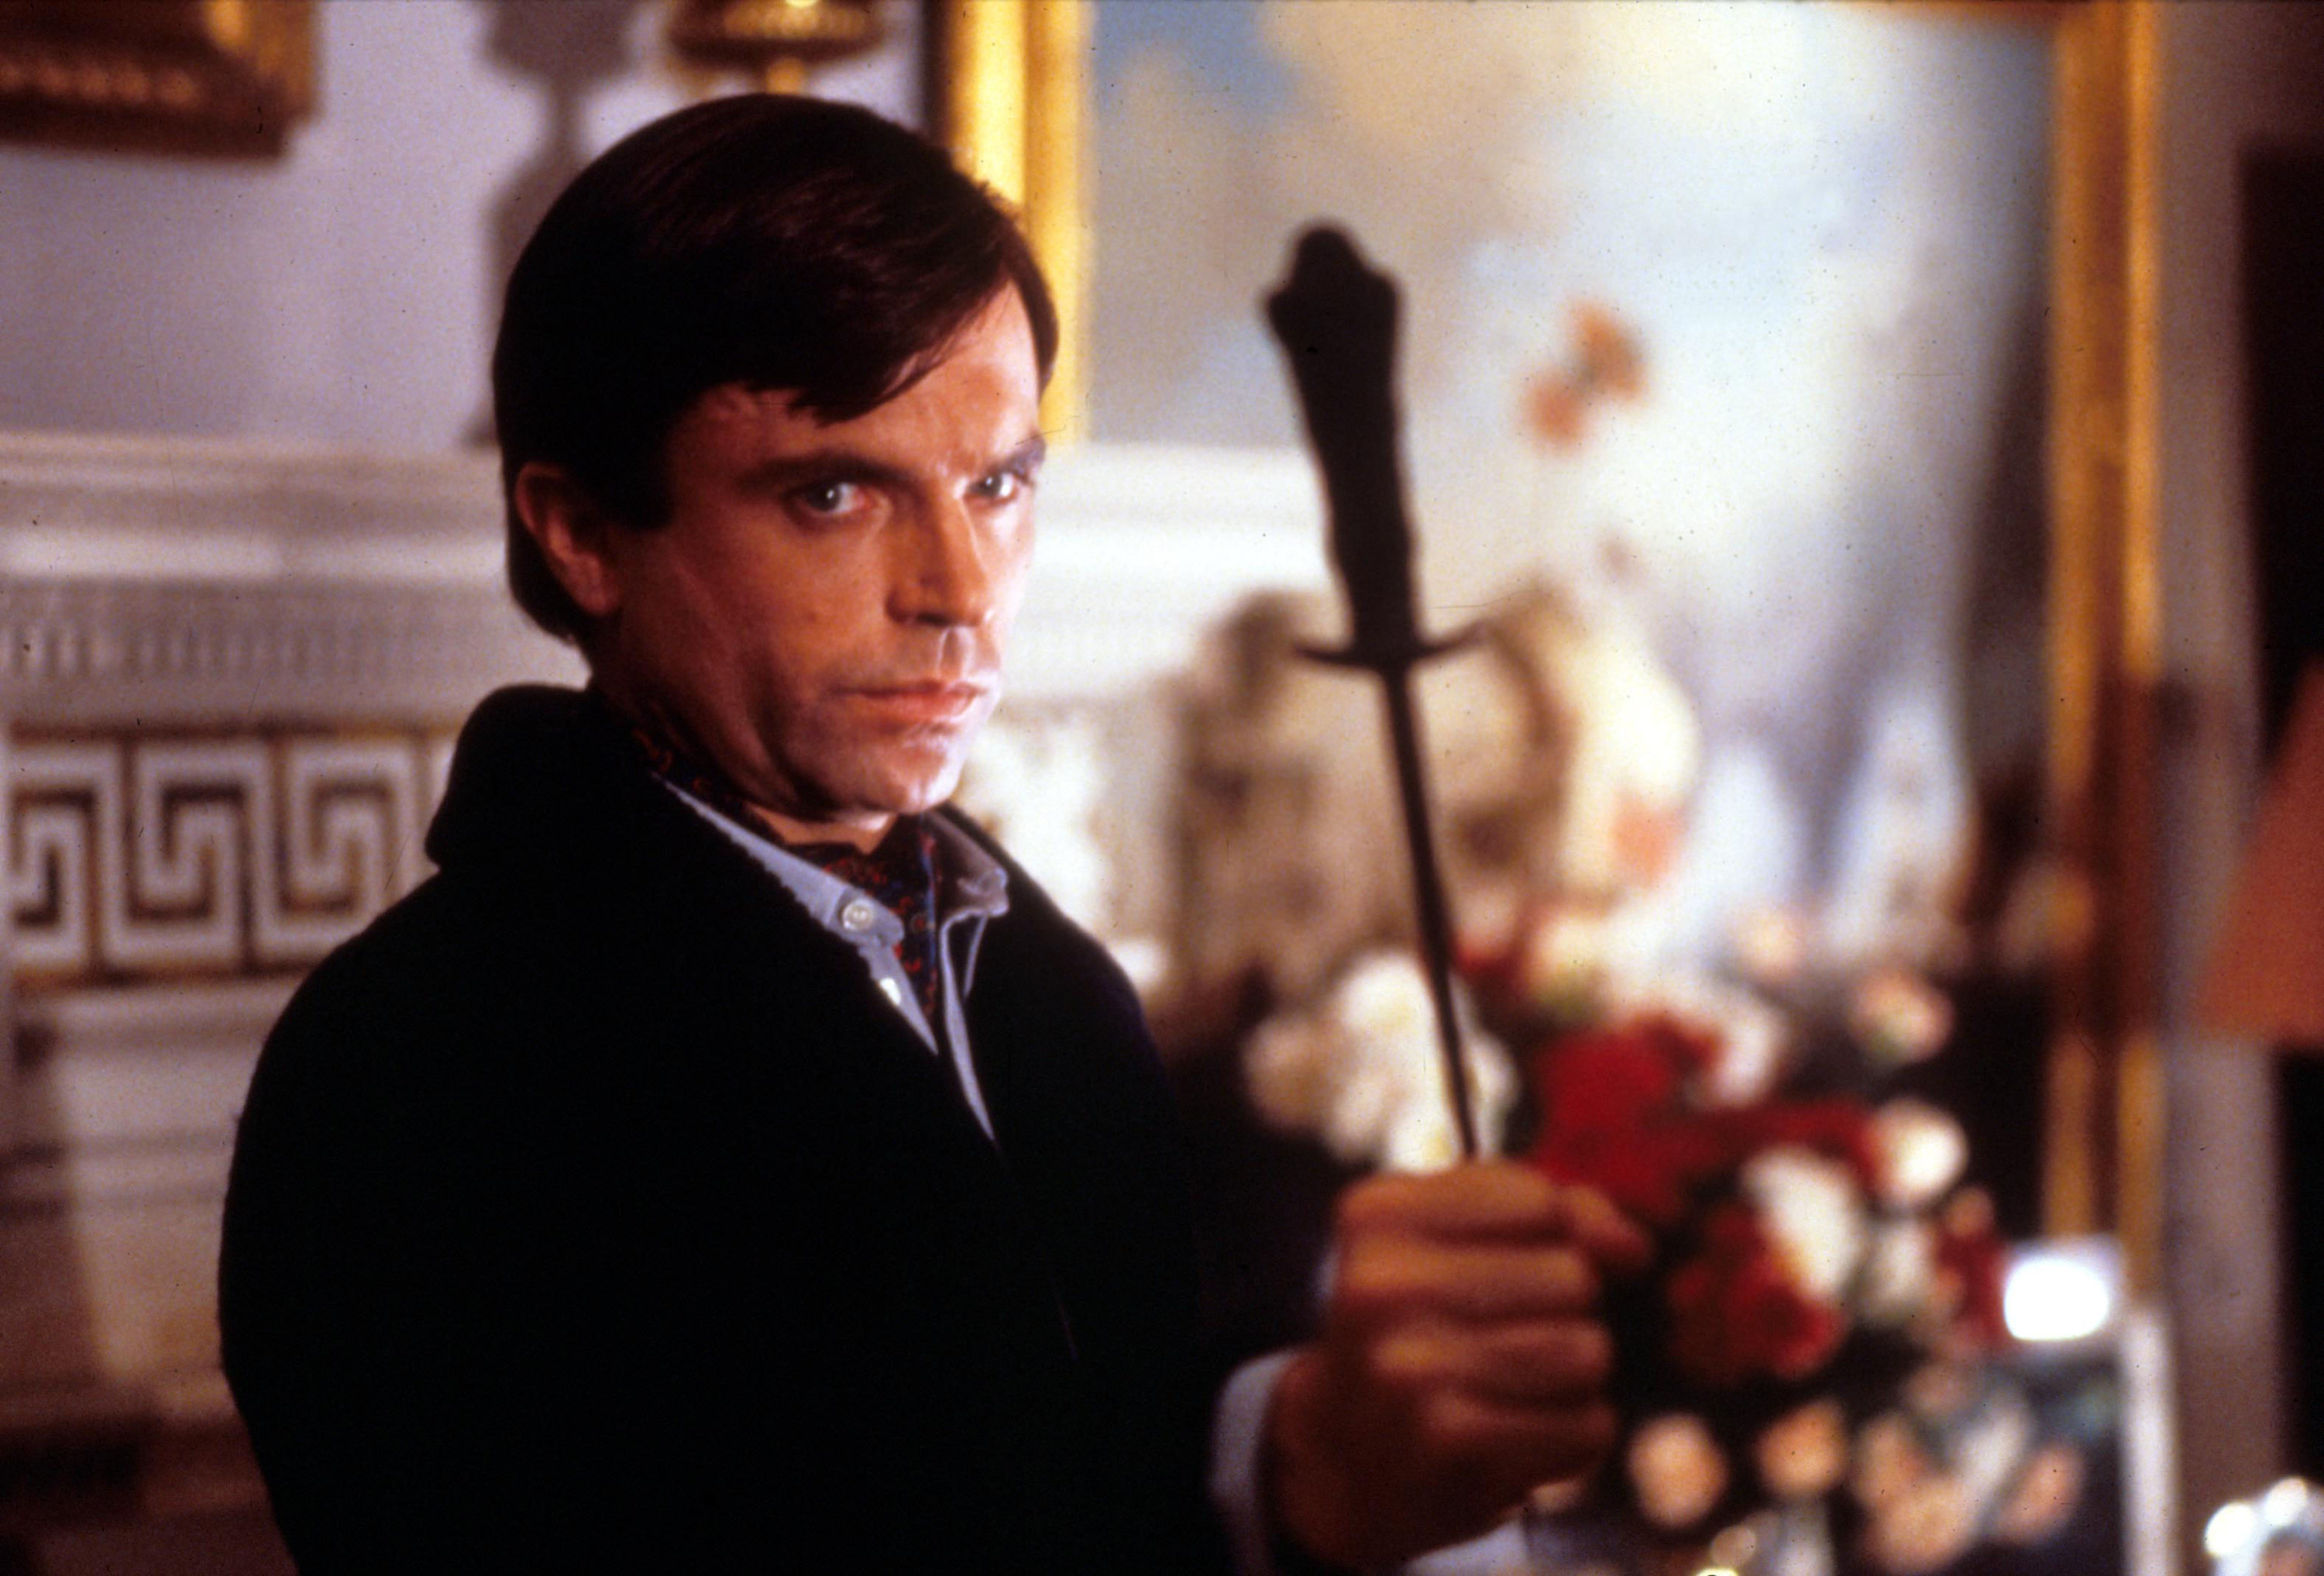 Sam Neill in “The Omen III: The Final Conflict”